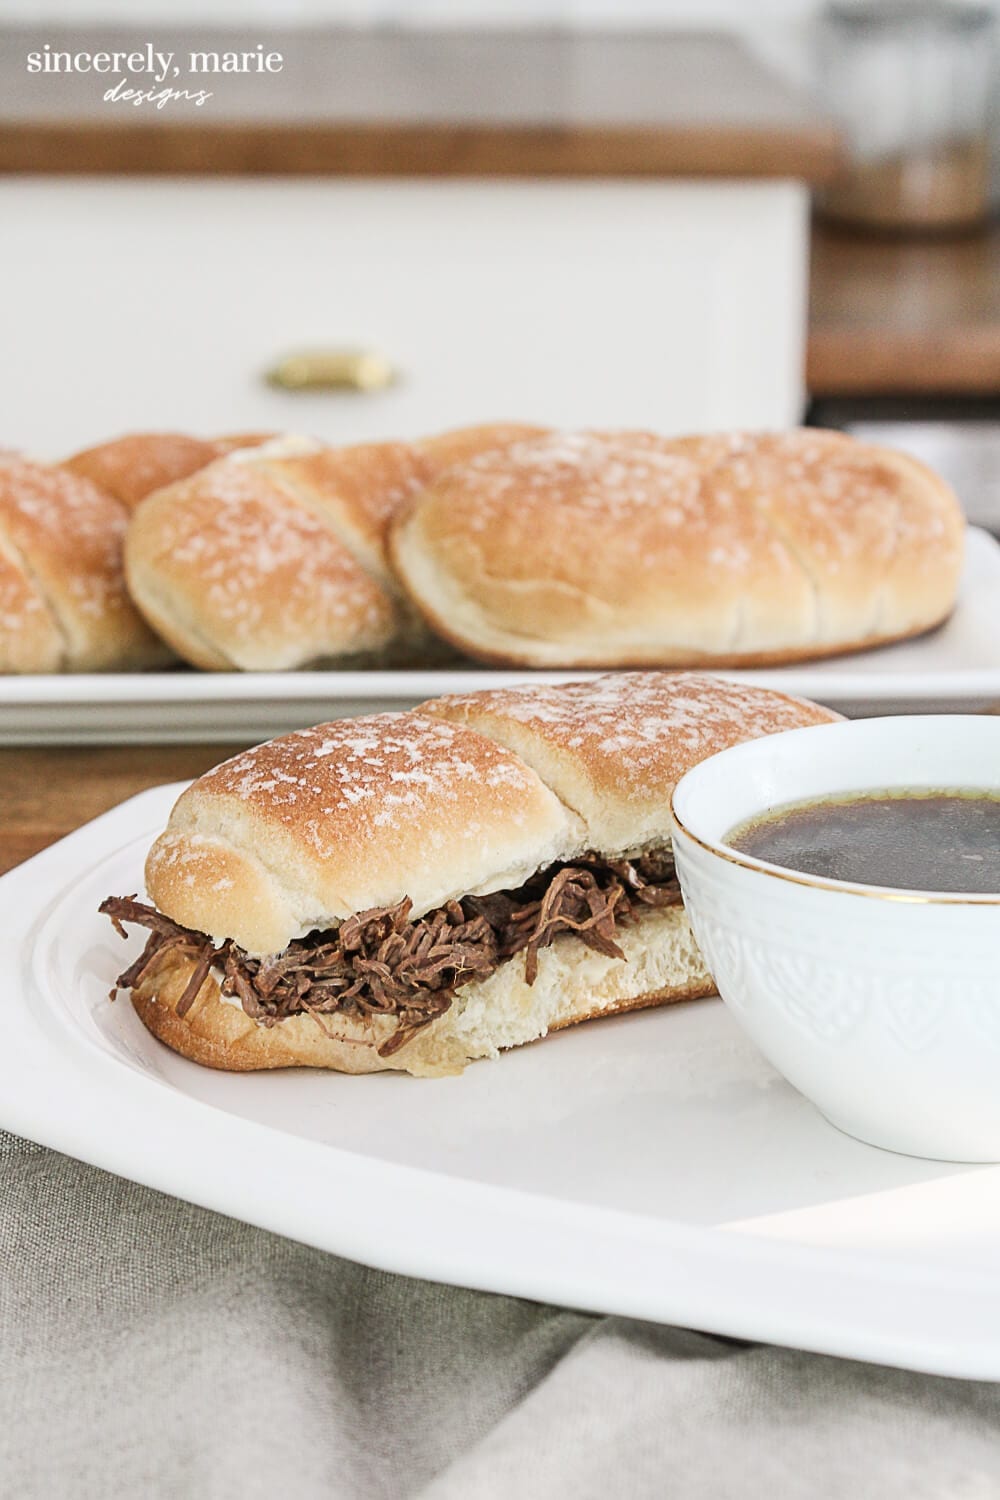 Welcome Home Sunday: Crock Pot French dip 2 ways